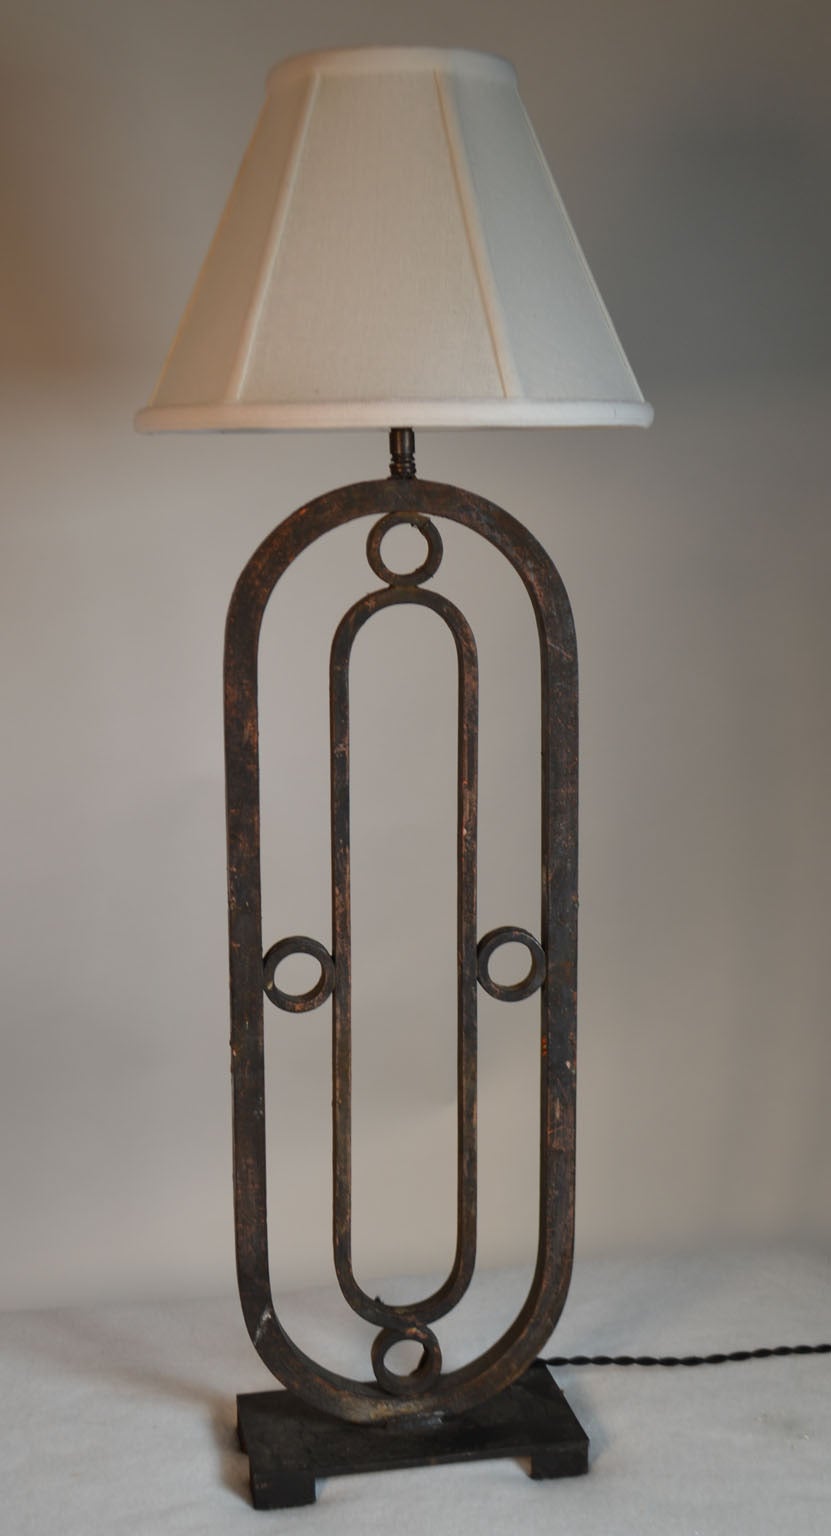 Pair of wrought iron lamps made from old grates, circa 1890. Rewired, three-way socket.